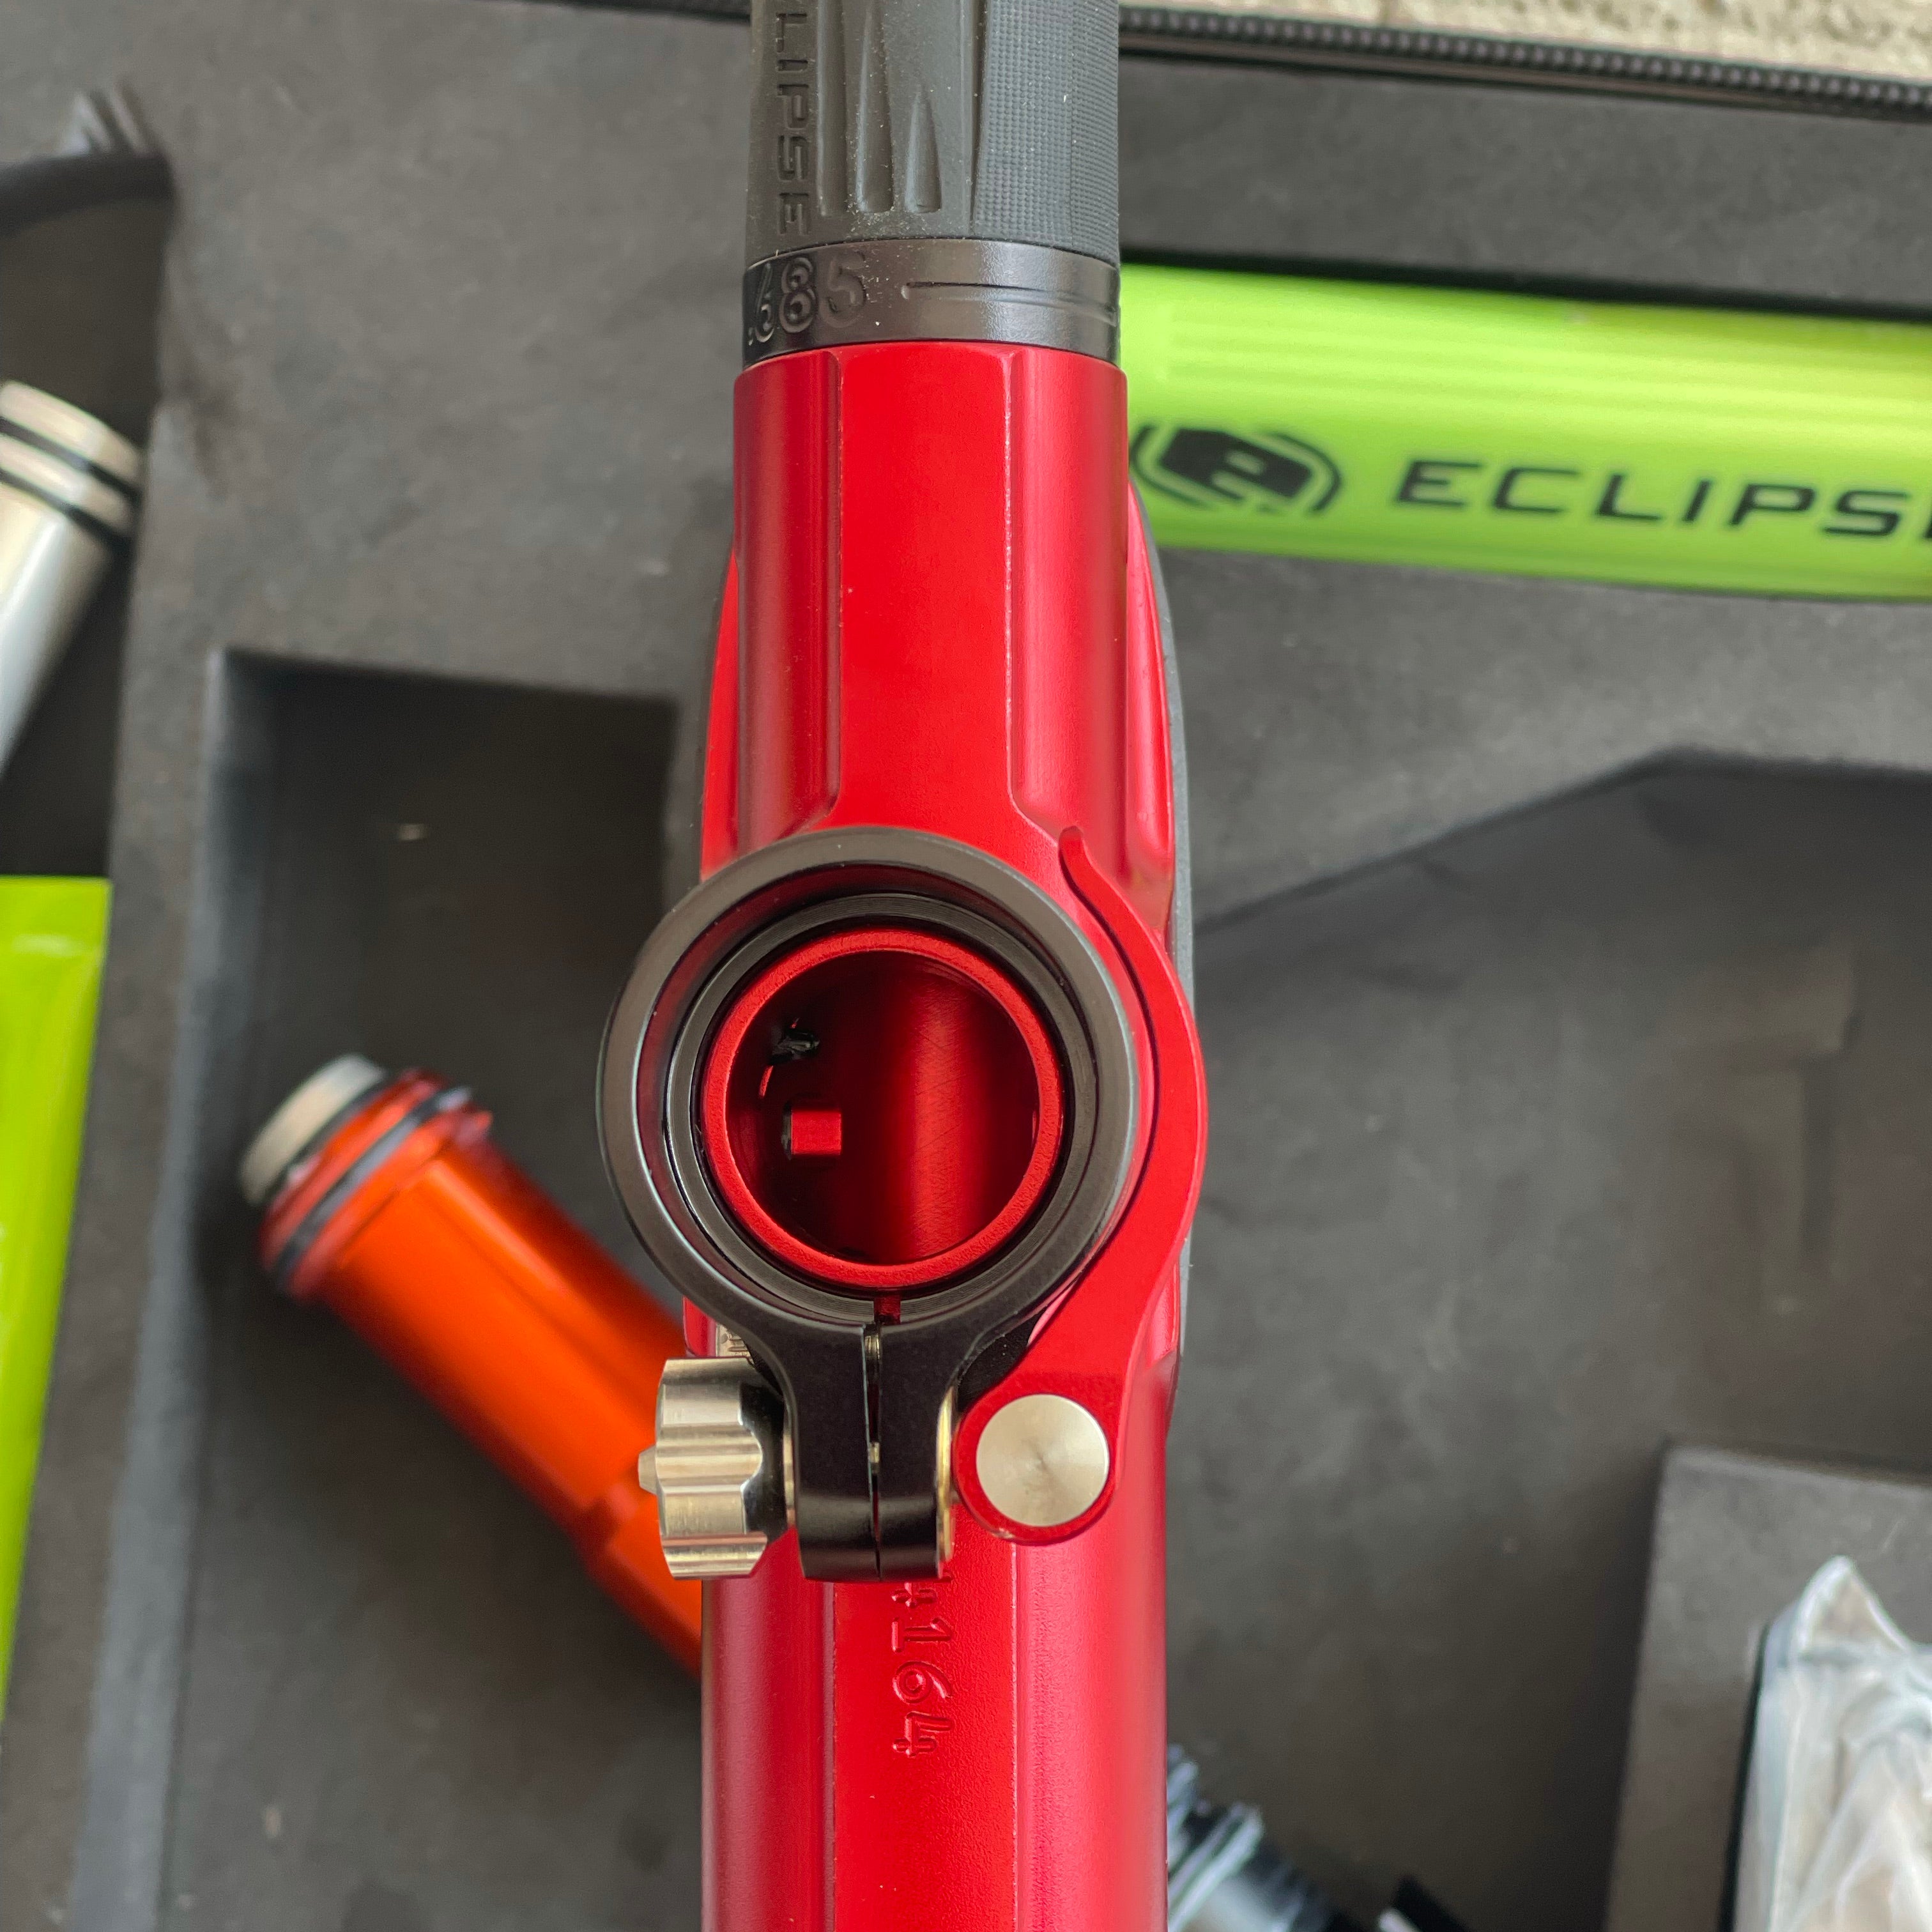 Used Planet Eclipse CS2 Pro Paintball Gun - Red/Back with Infamous Silencio Tip